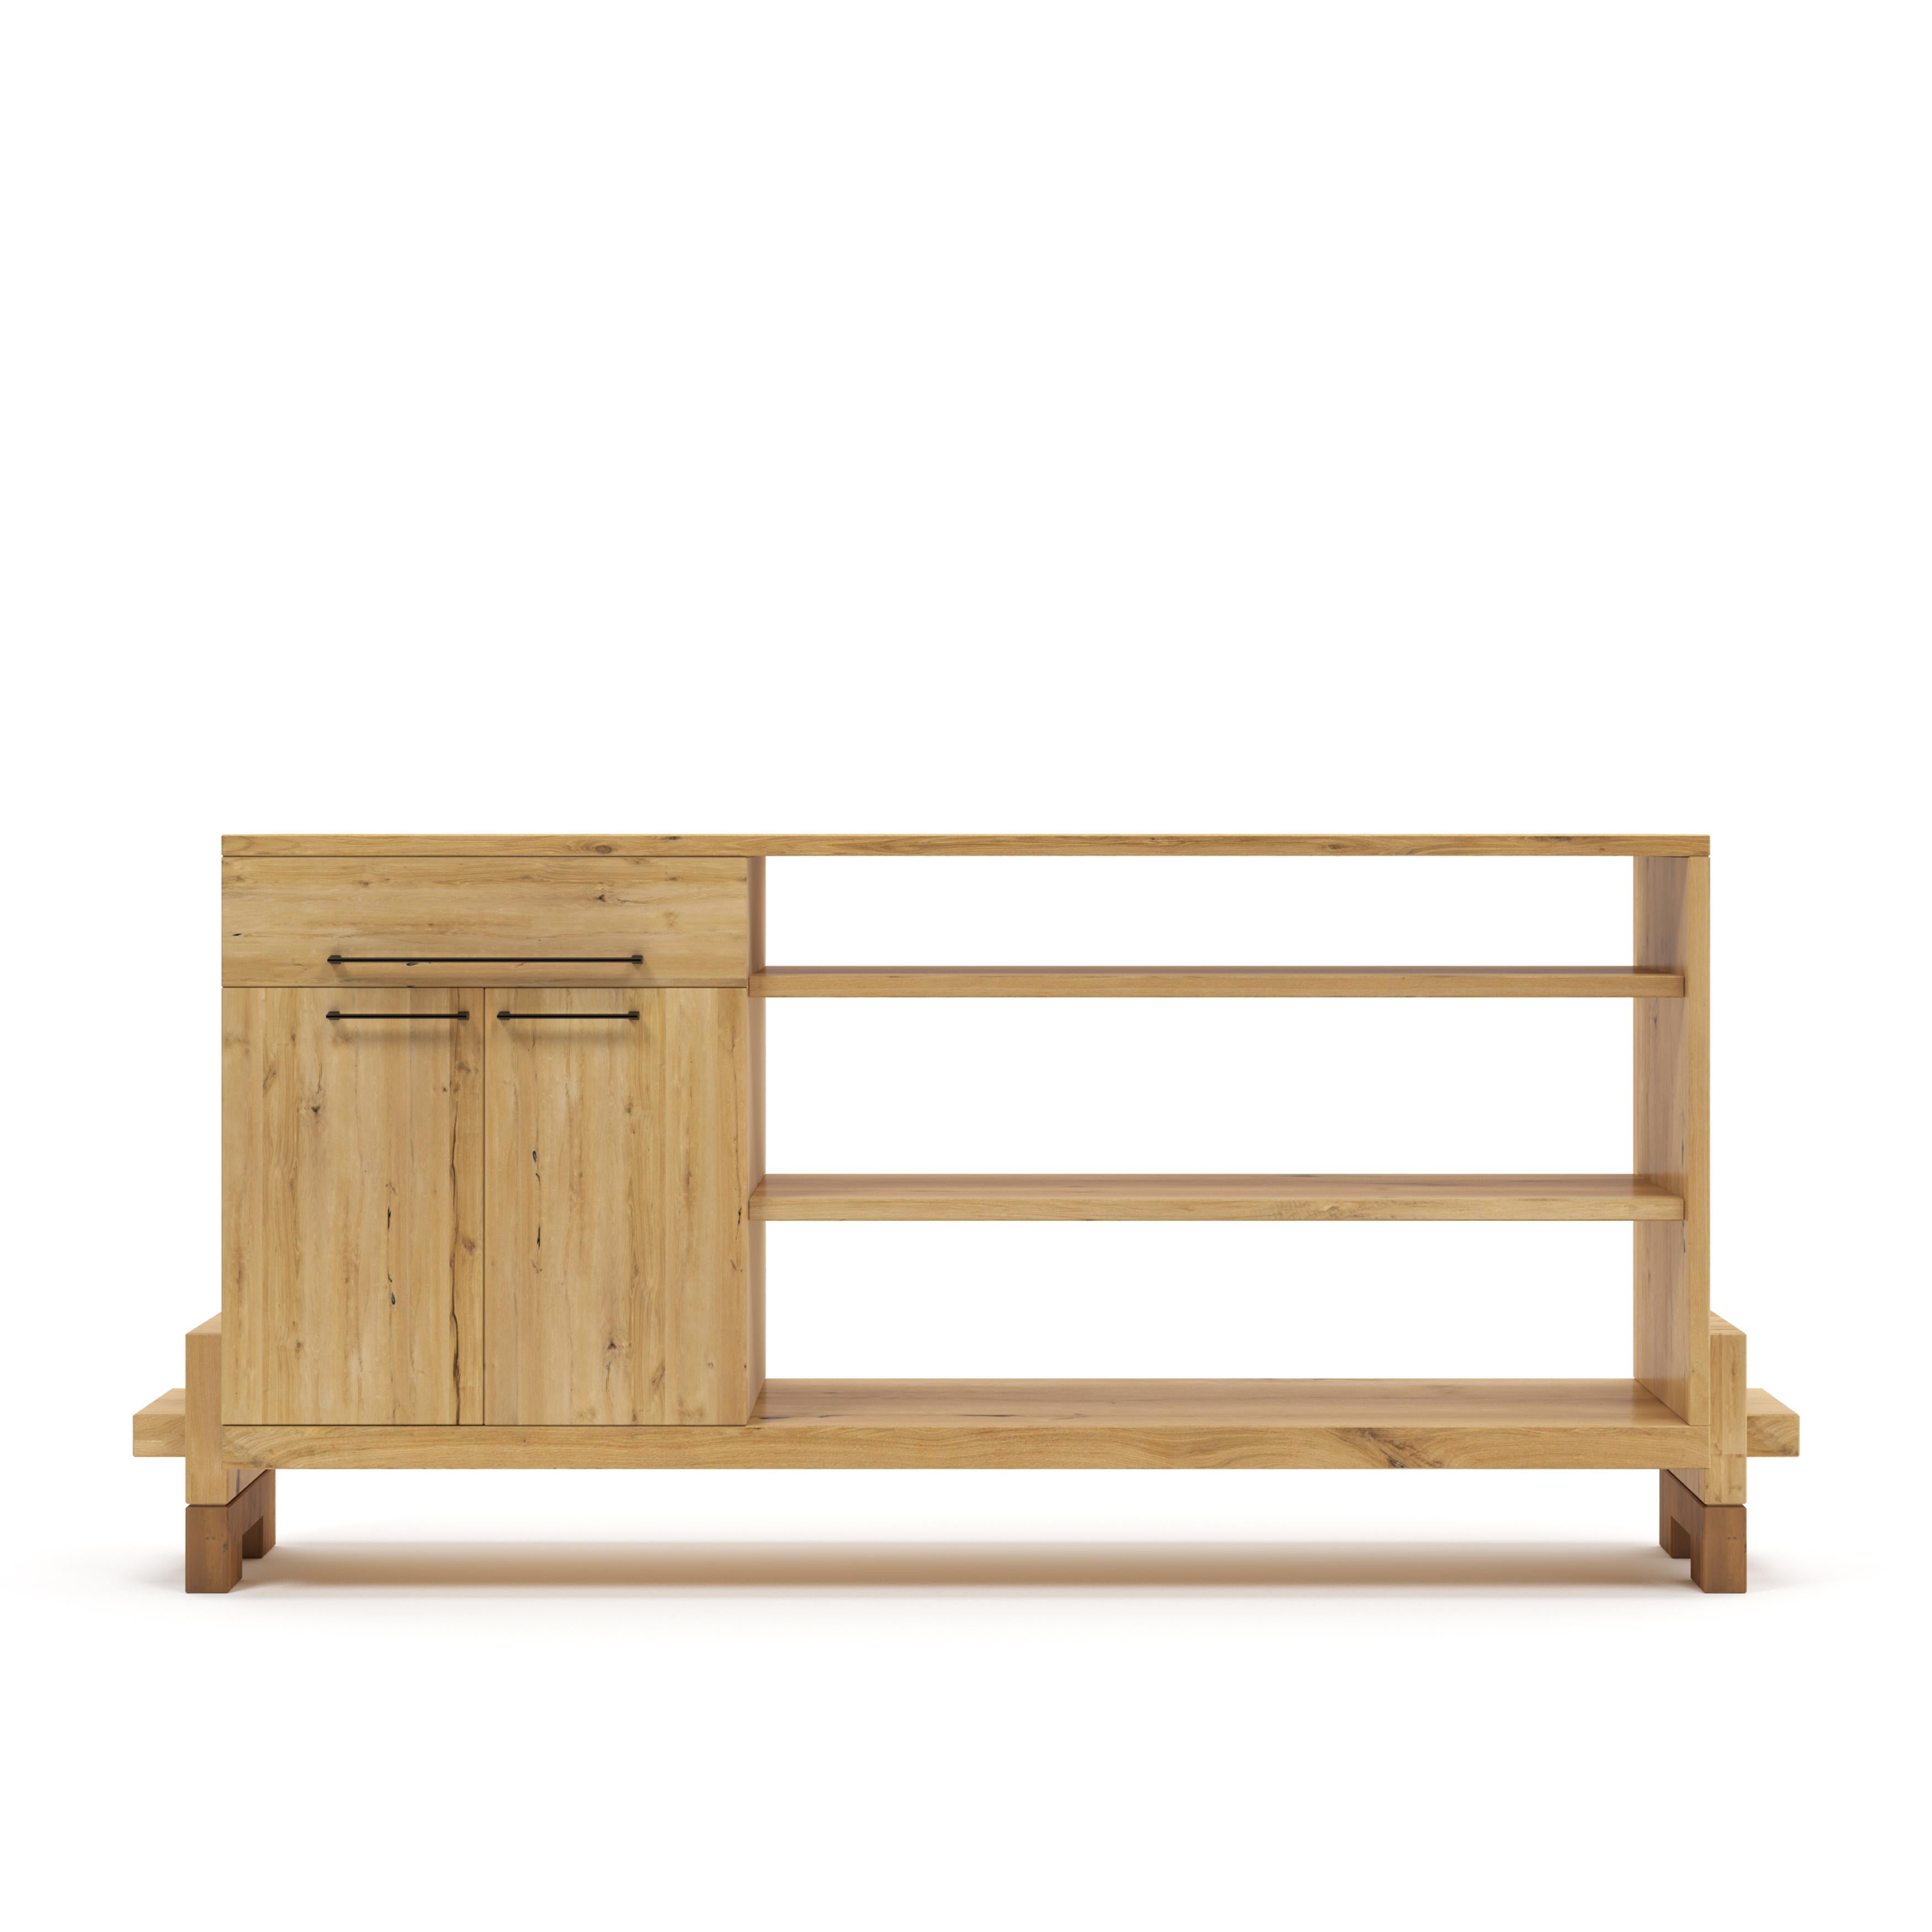 Country Pana Sideboard S For Sale